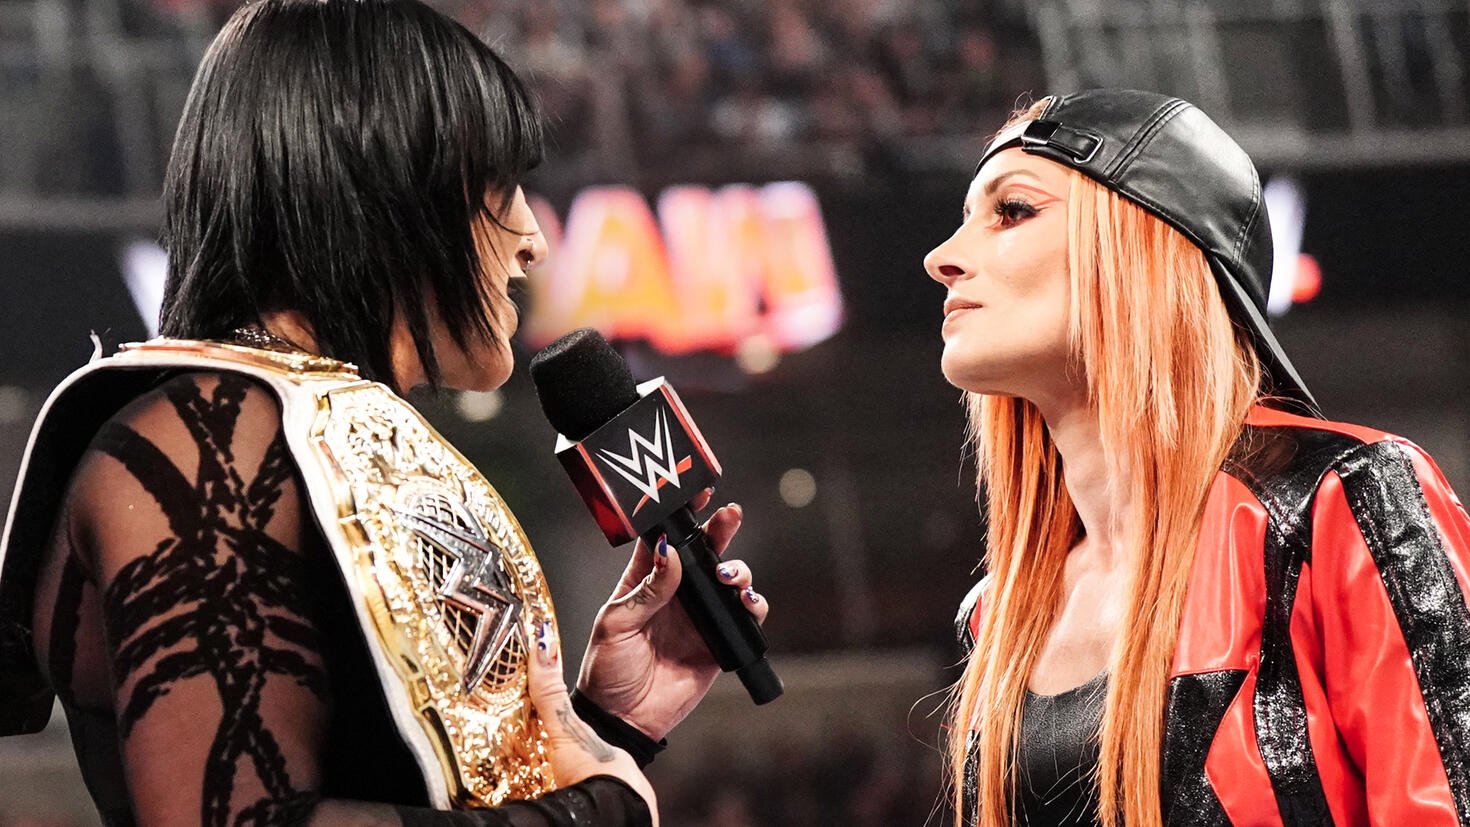 Becky Lynch Sends a Message to Rhea Ripley: “Savor Your Final Days as Champion!”